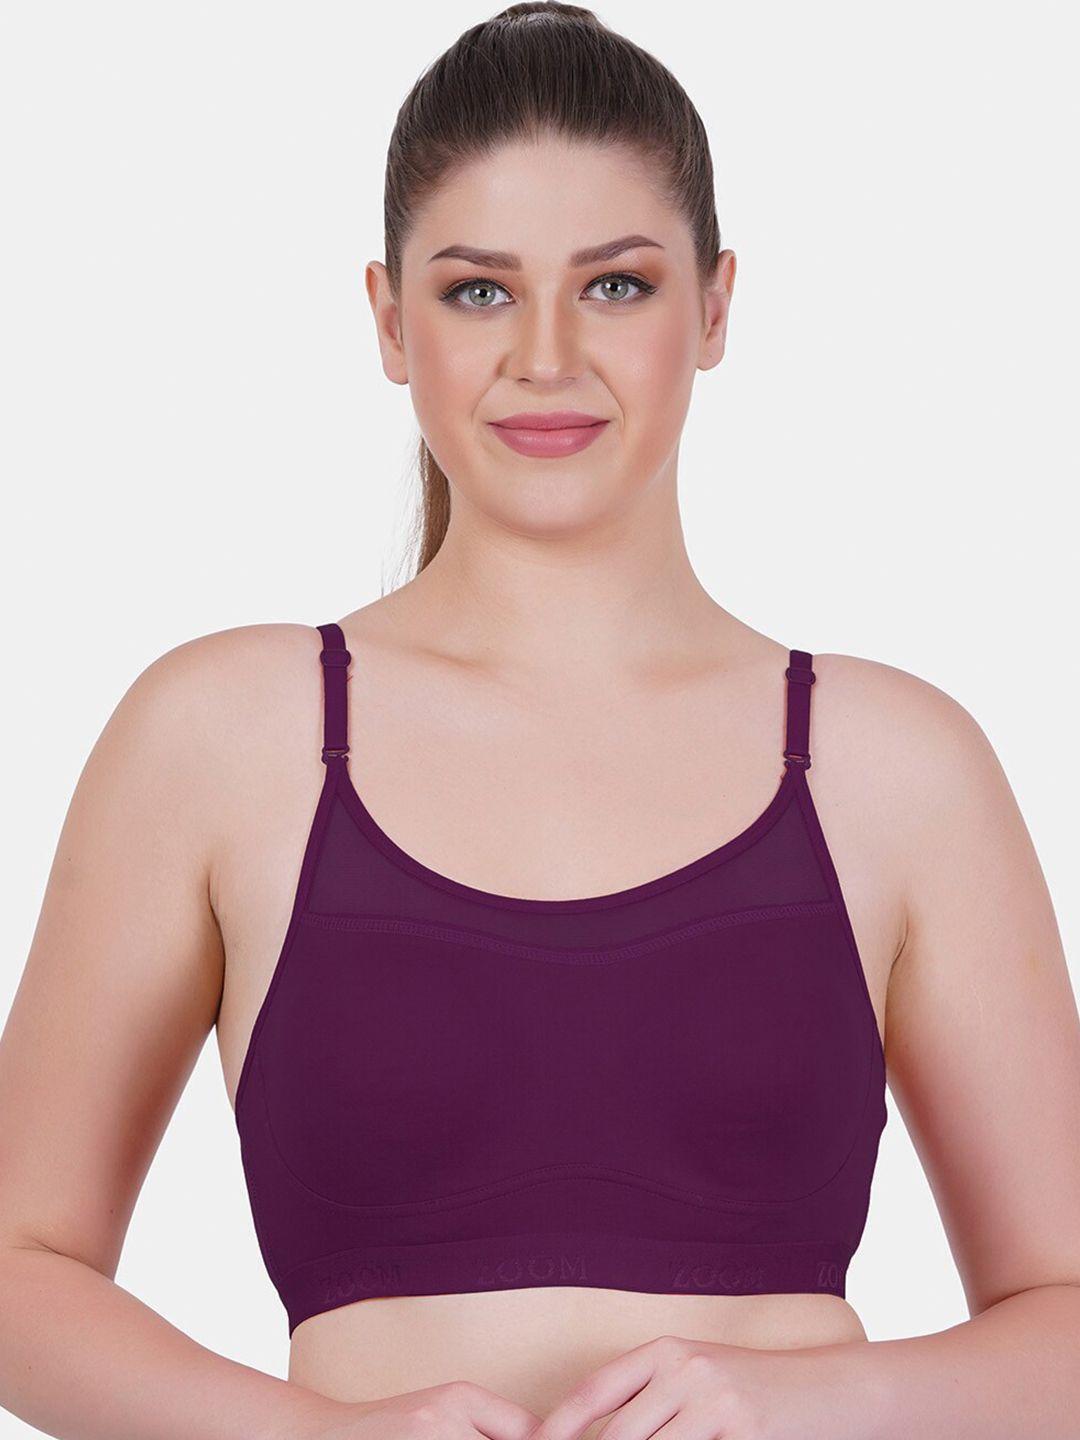 reveira non-wired non padded seamless dry fit workout bra with all day comfort